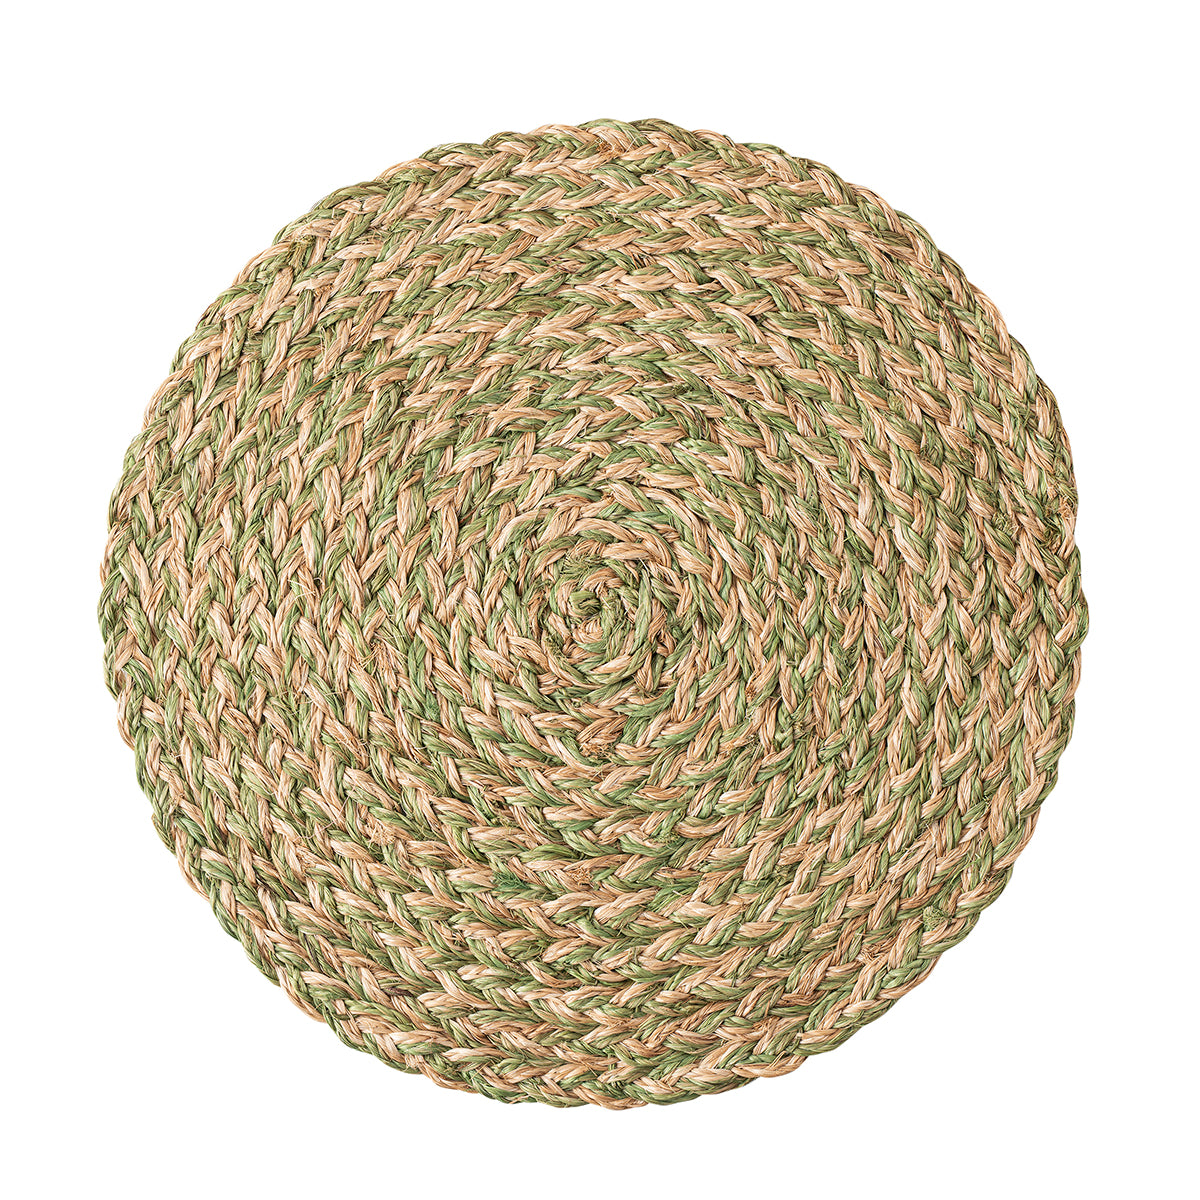 Woven Straw Placemat - Sage